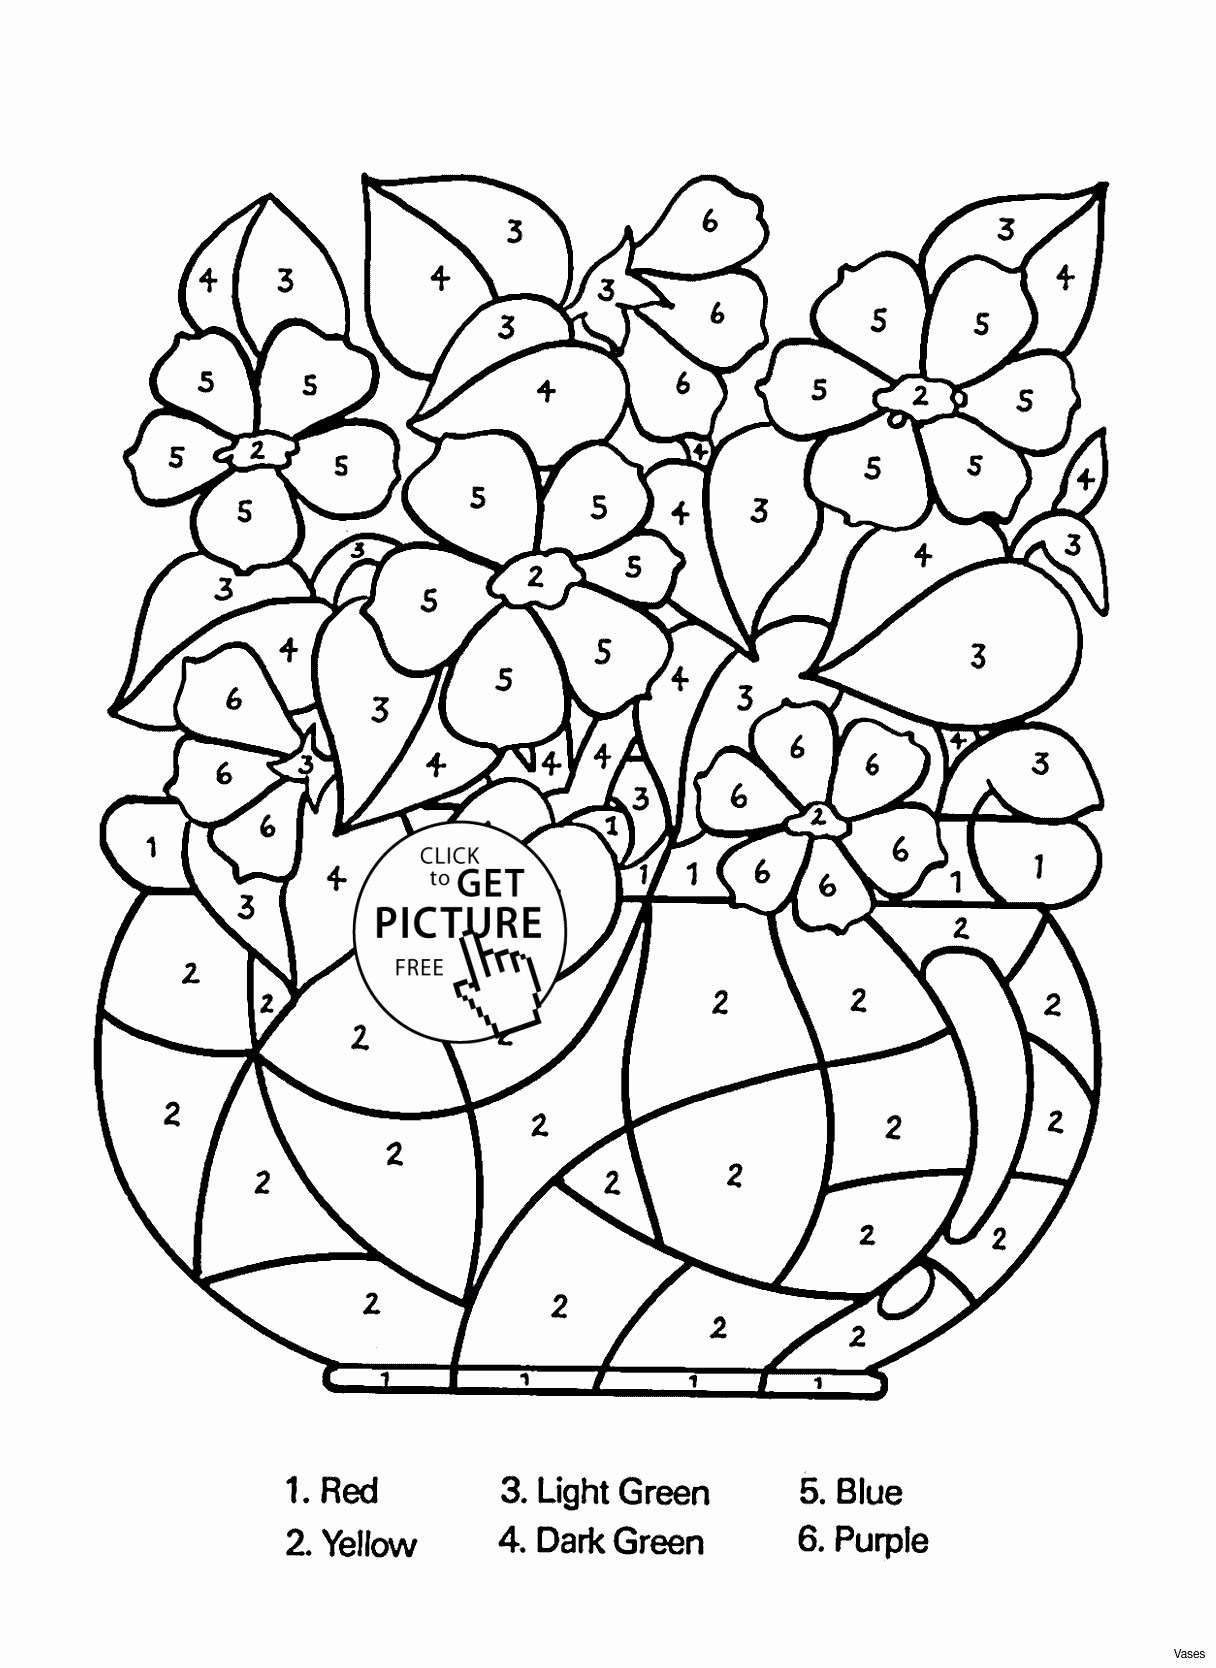 18 Stylish White Bud Vase 2024 free download white bud vase of white glass vase elegant vases flower vase coloring page pages with regard to white glass vase elegant vases flower vase coloring page pages flowers in a top i 0d